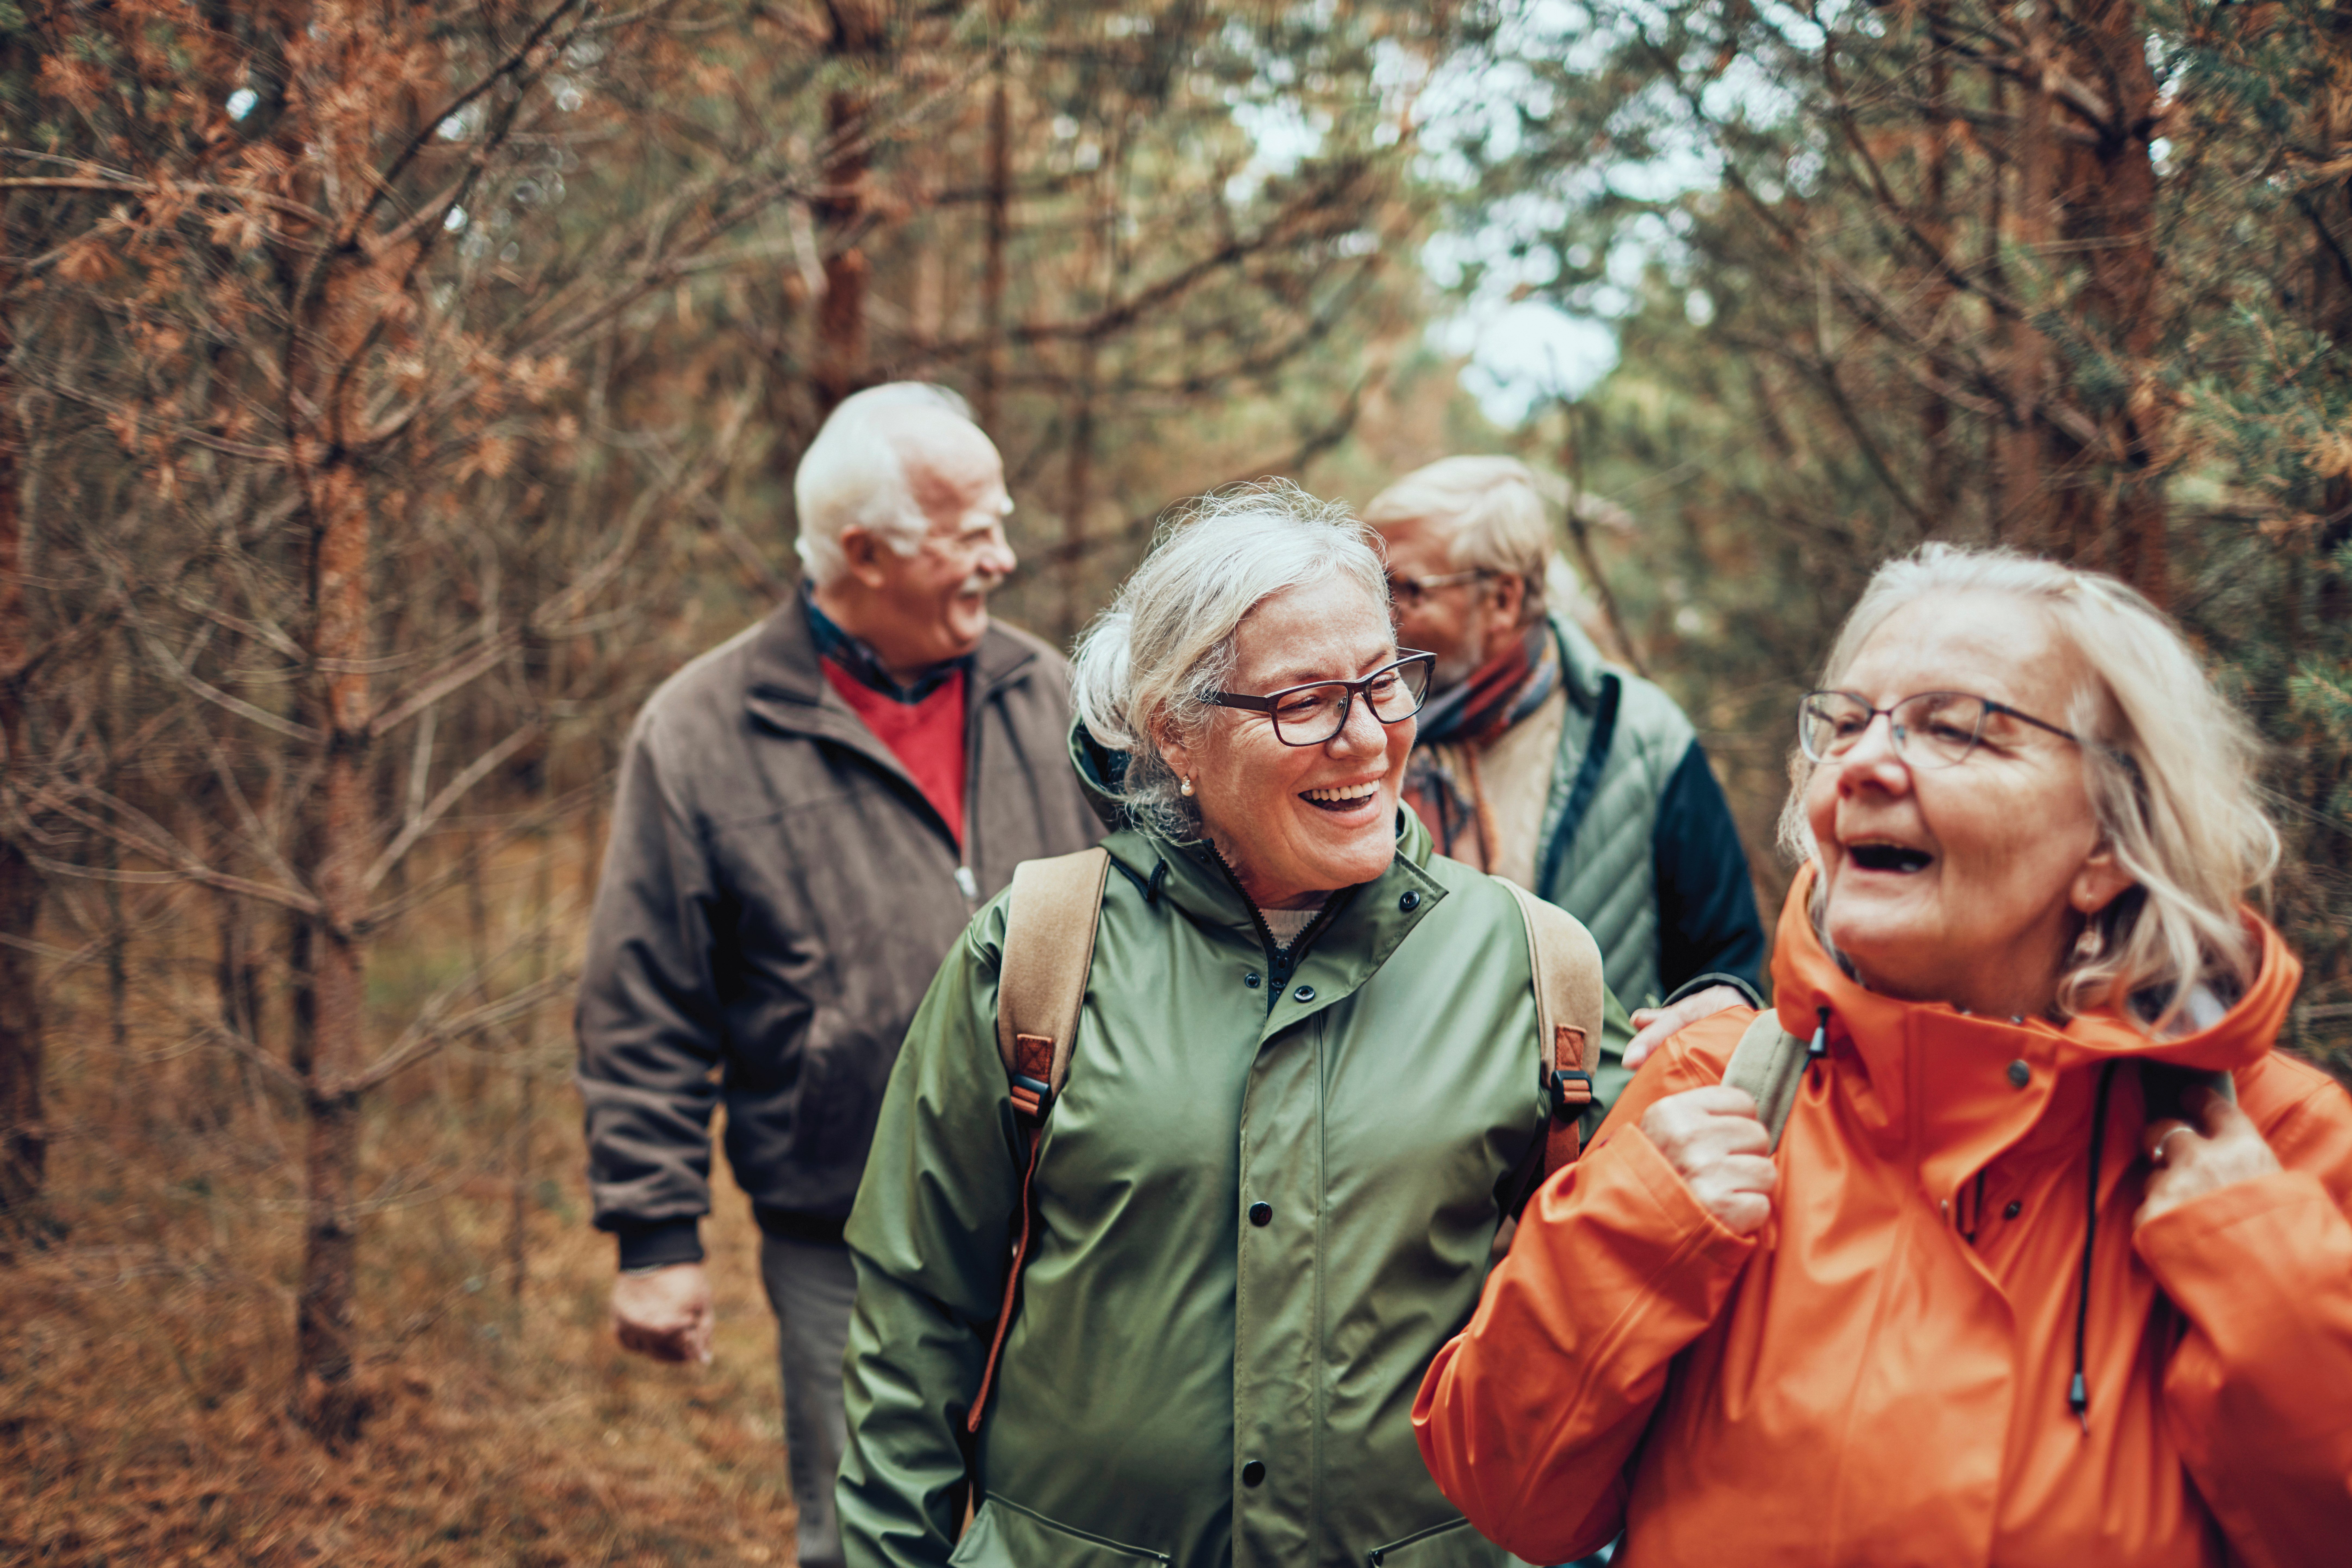 a group of elderly friends hiking in nature together wearing winter coats